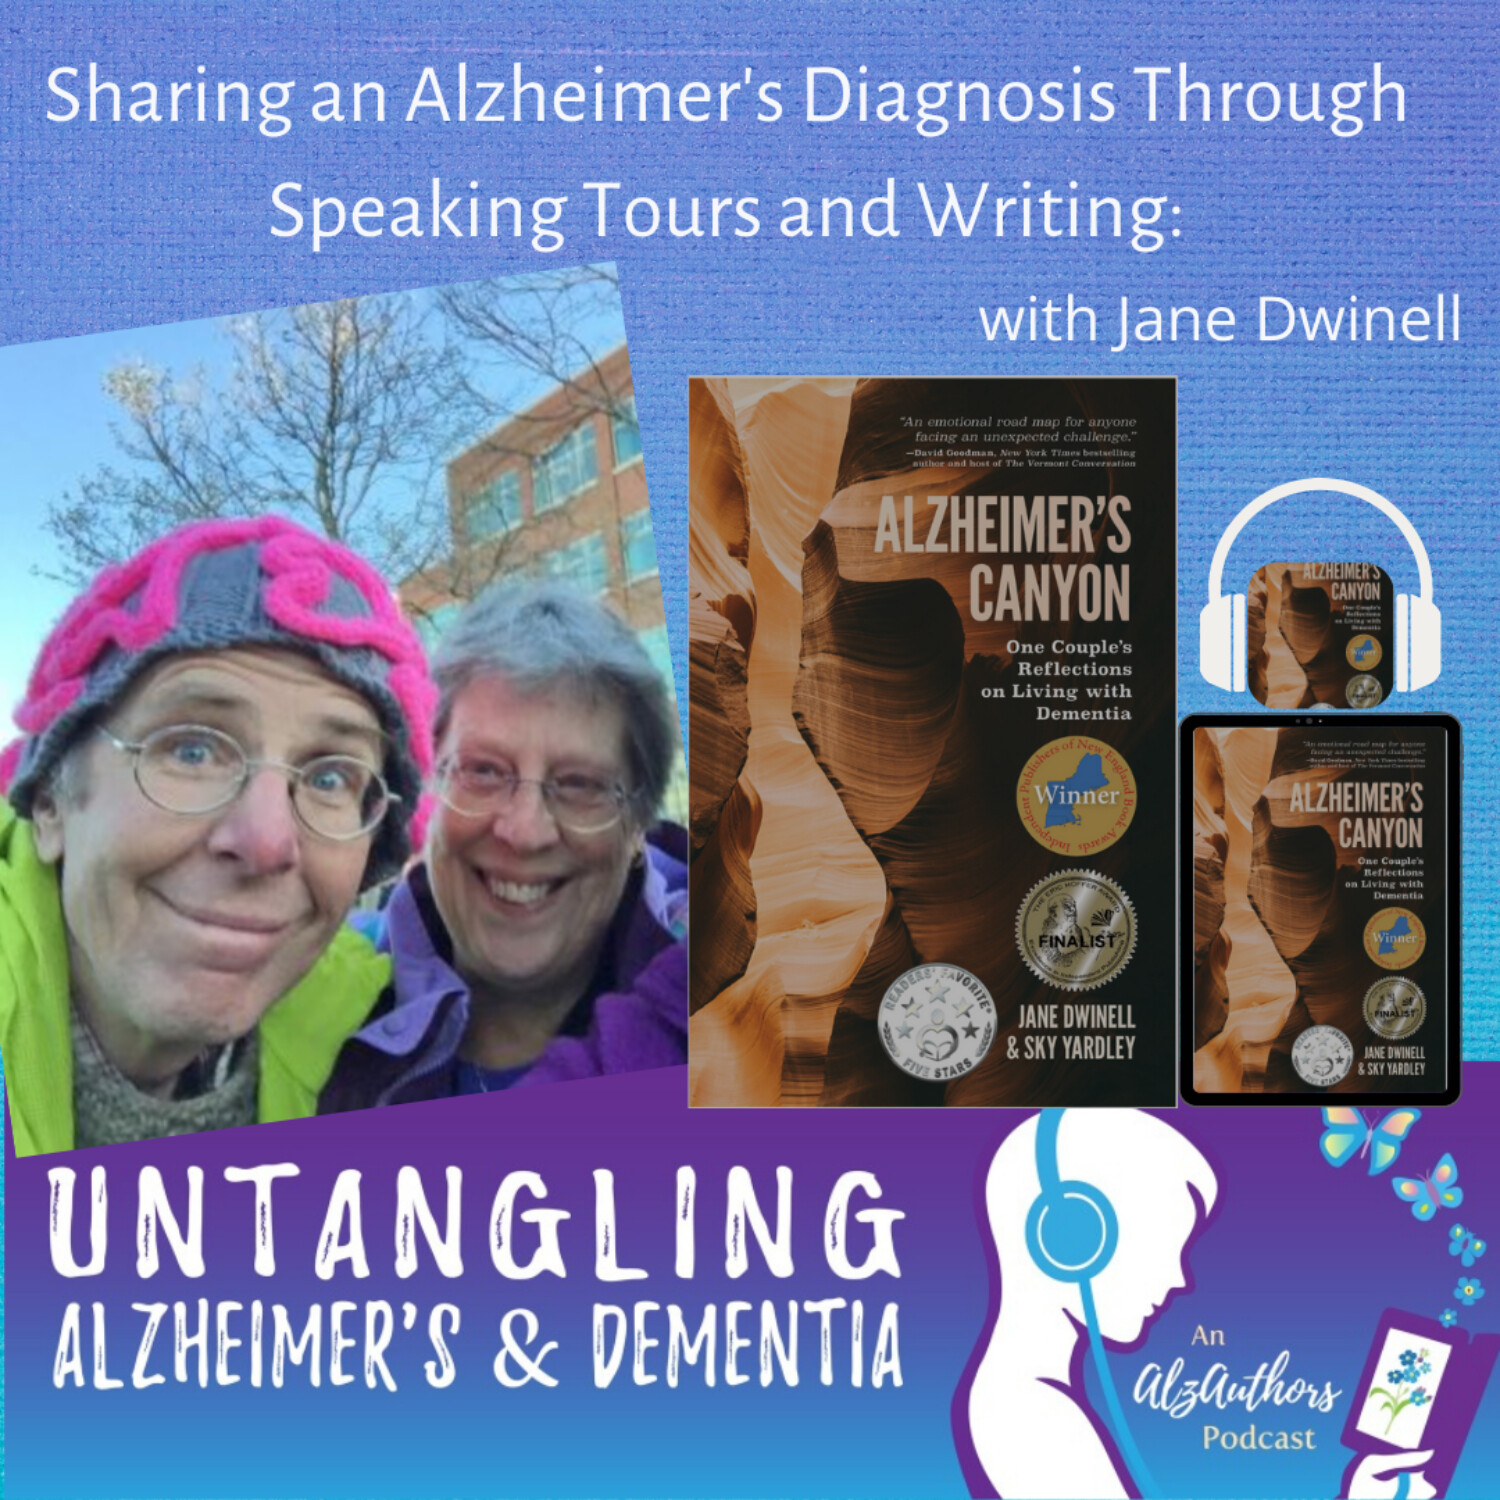 Sharing an Alzheimer’s Diagnosis Through Speaking Tours and Writing